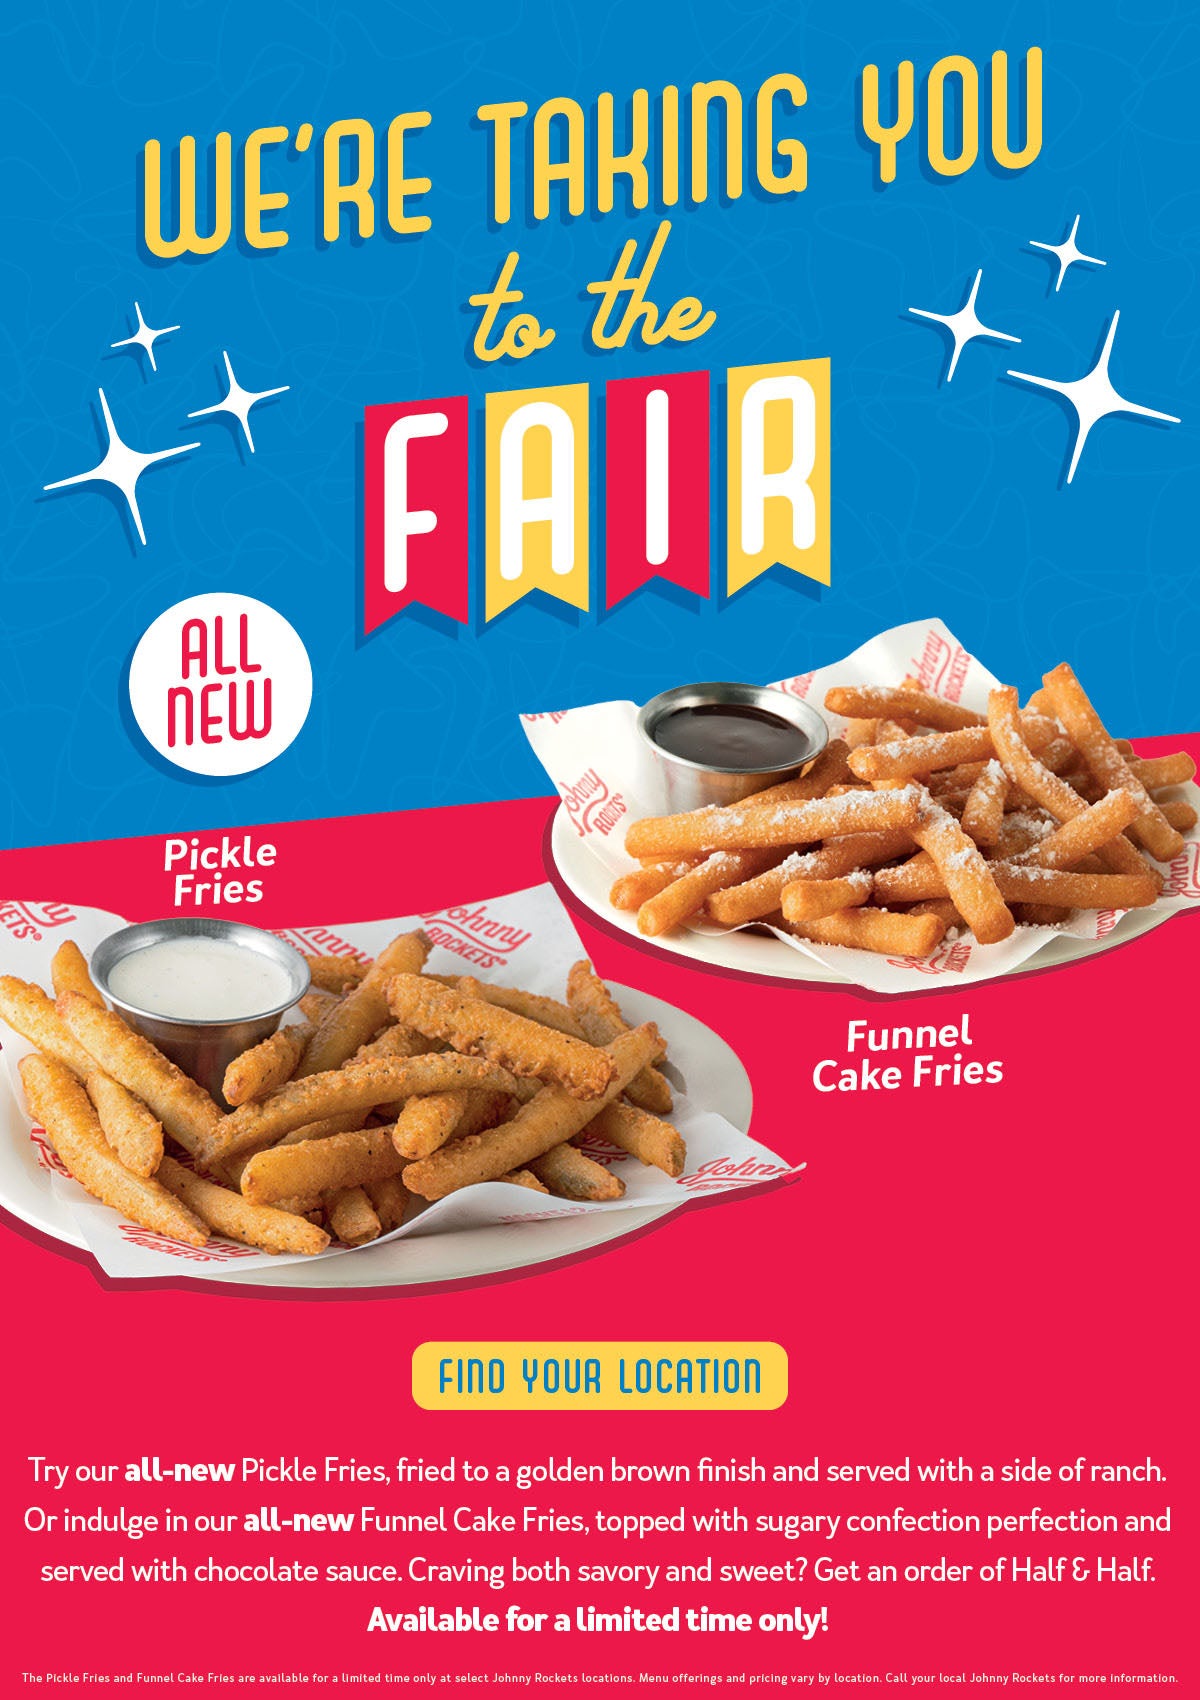 Try Our All-New Pickle Fries and Funnel Cake Fries!